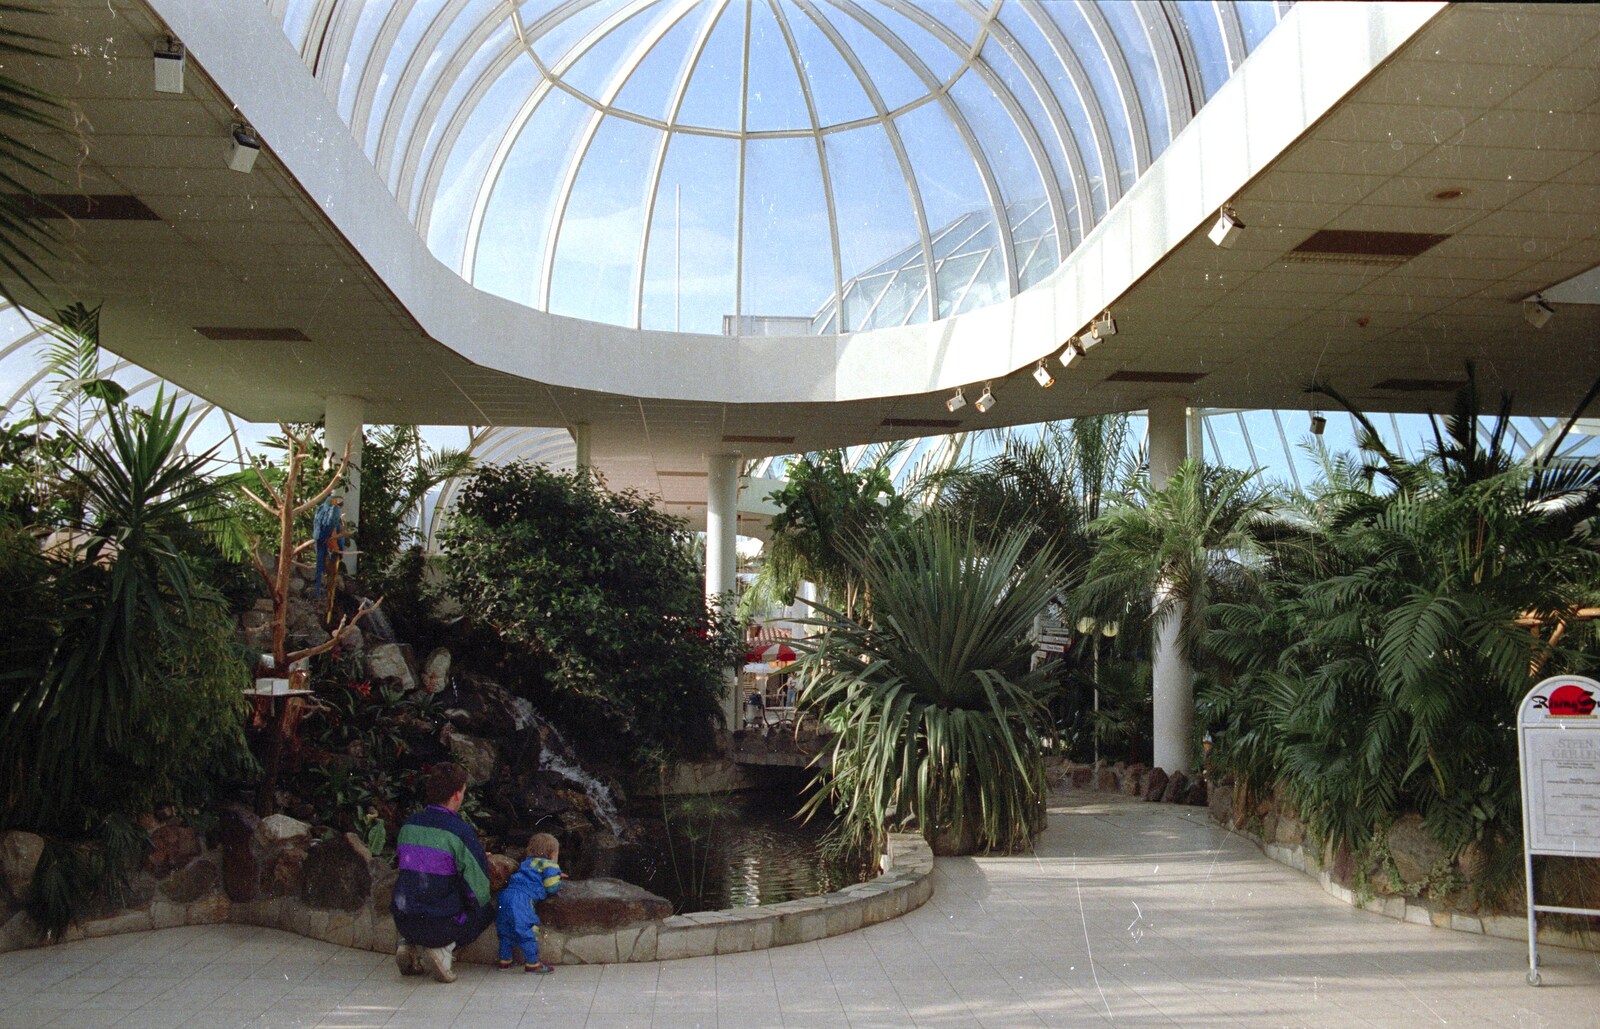 A Trip to Center Parcs, Eemhof, Netherlands - 24th March 1992: A leafy atrium